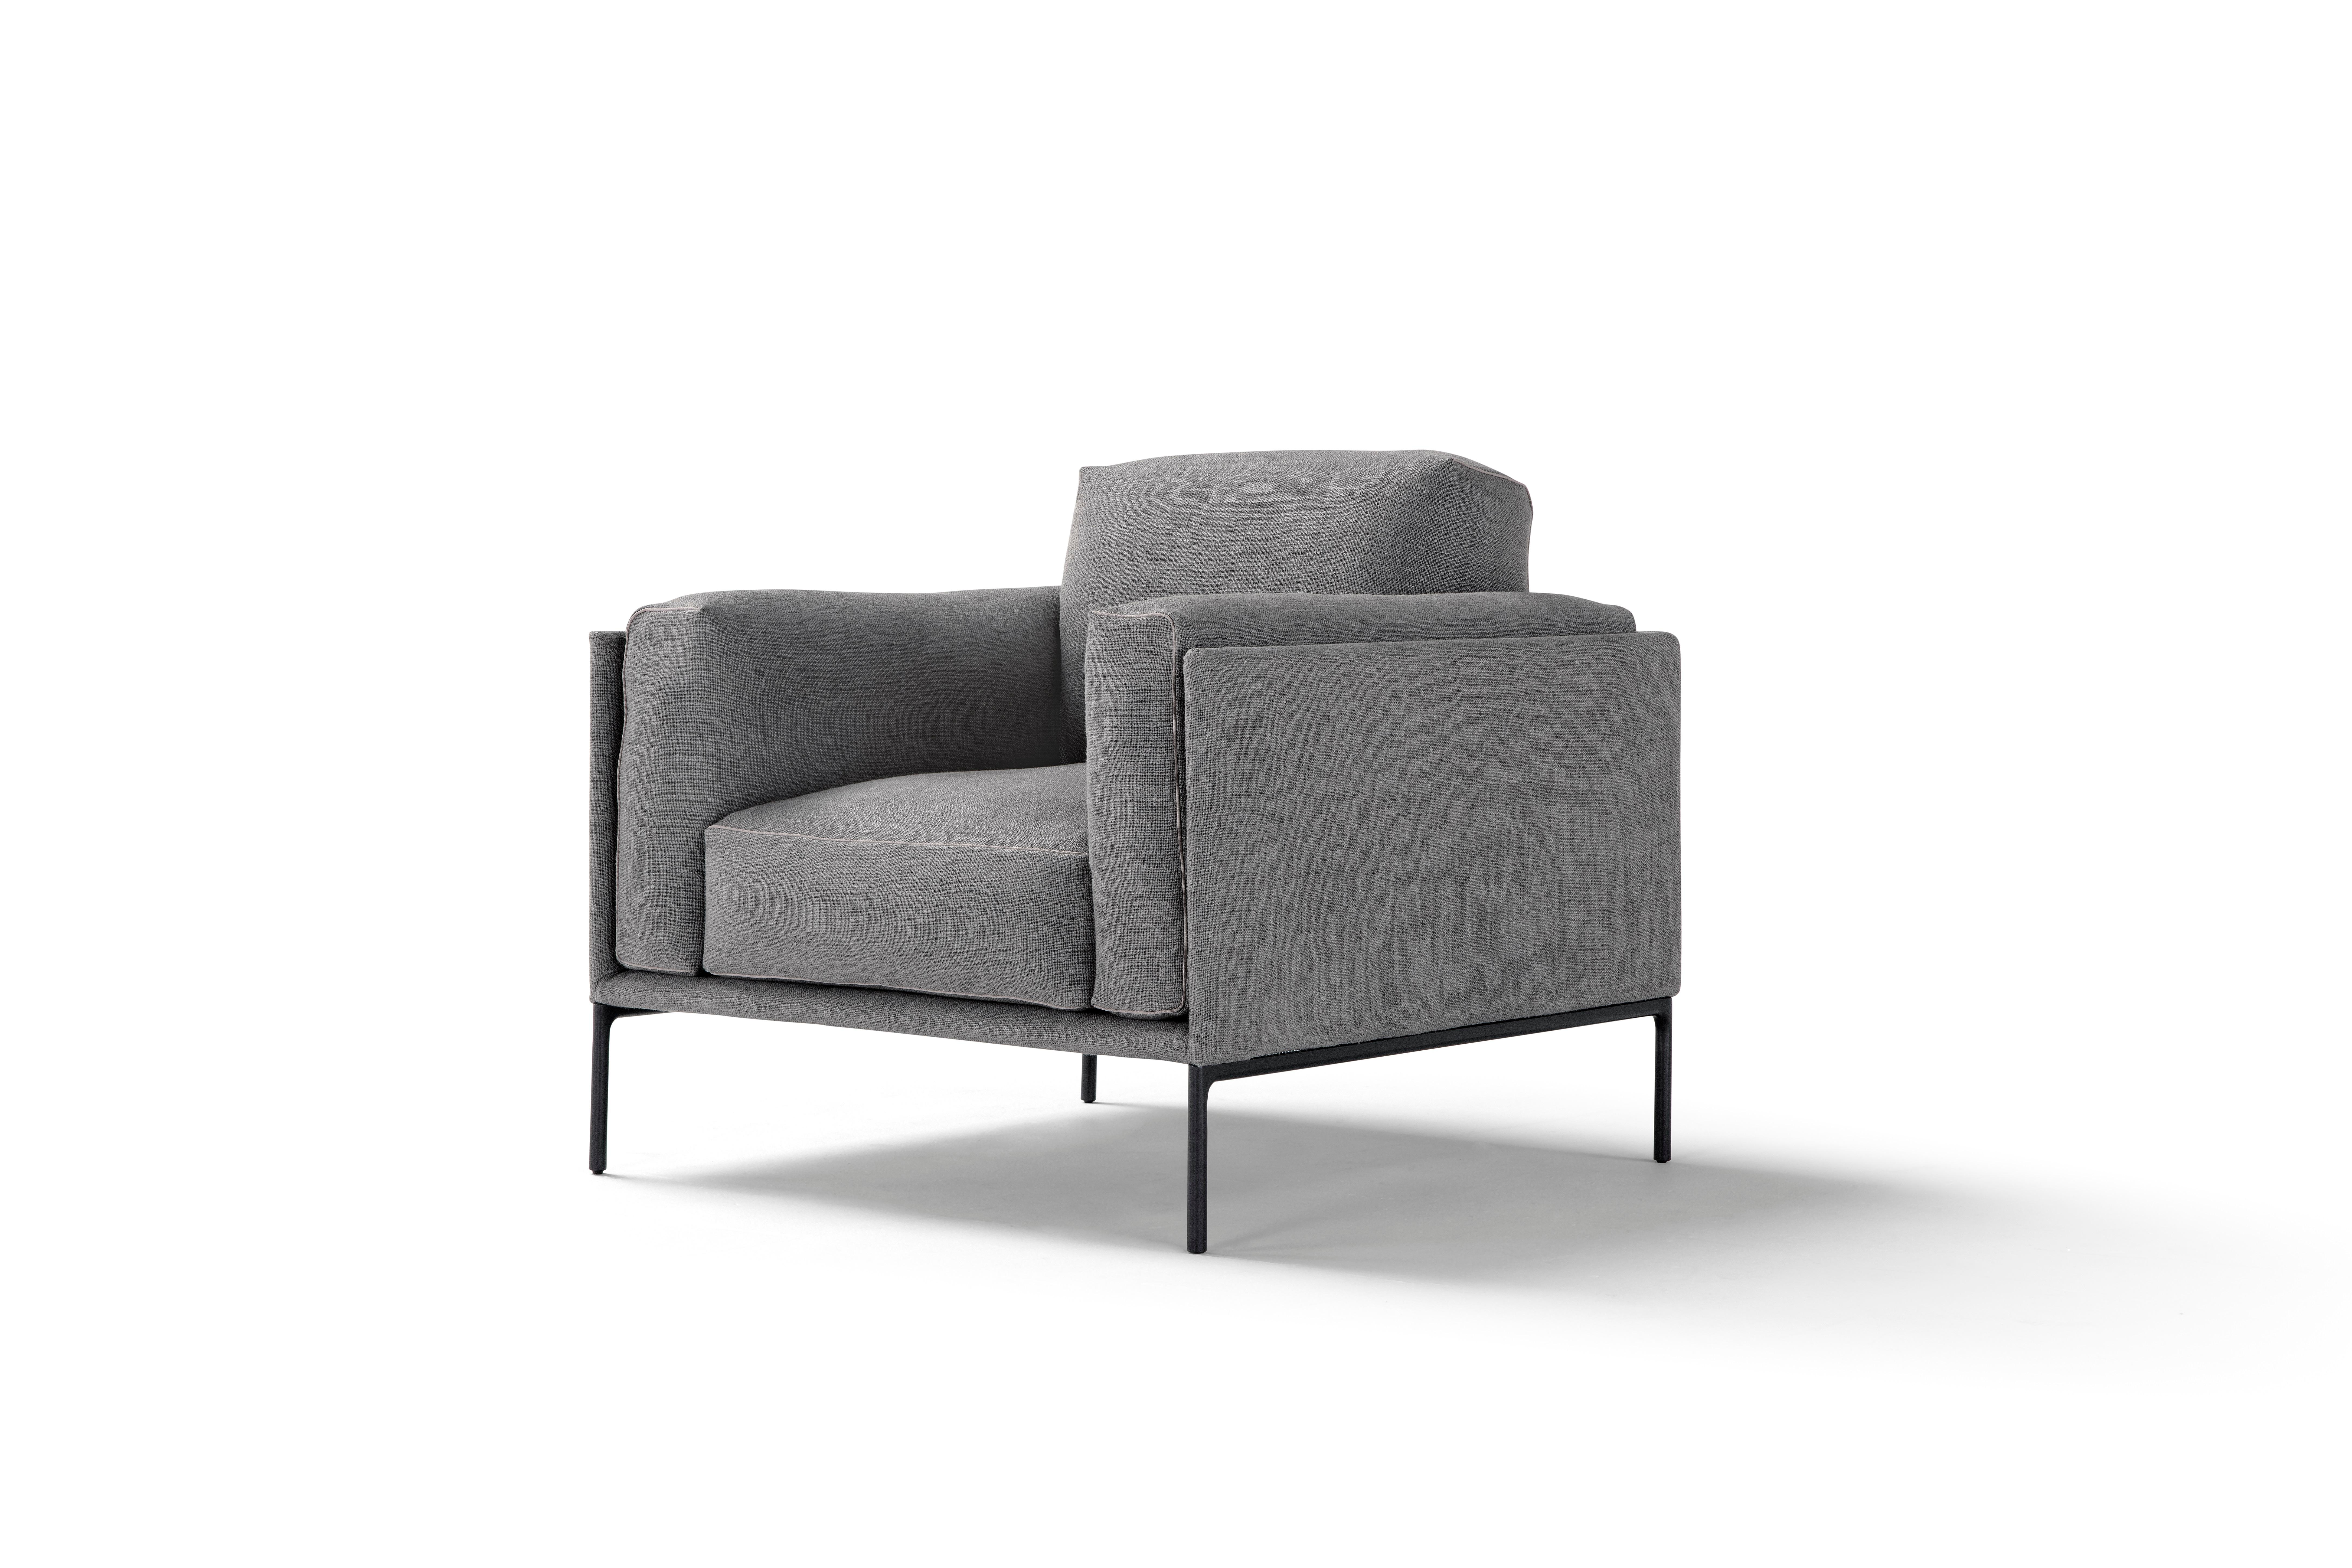 A rigorous and regular shell embraces soft and enveloping seat and back cushions. Giorgio has the formal characteristics of a slender and modern model without compromising on the extreme comfort of classic sofas, on which you can relax and live an